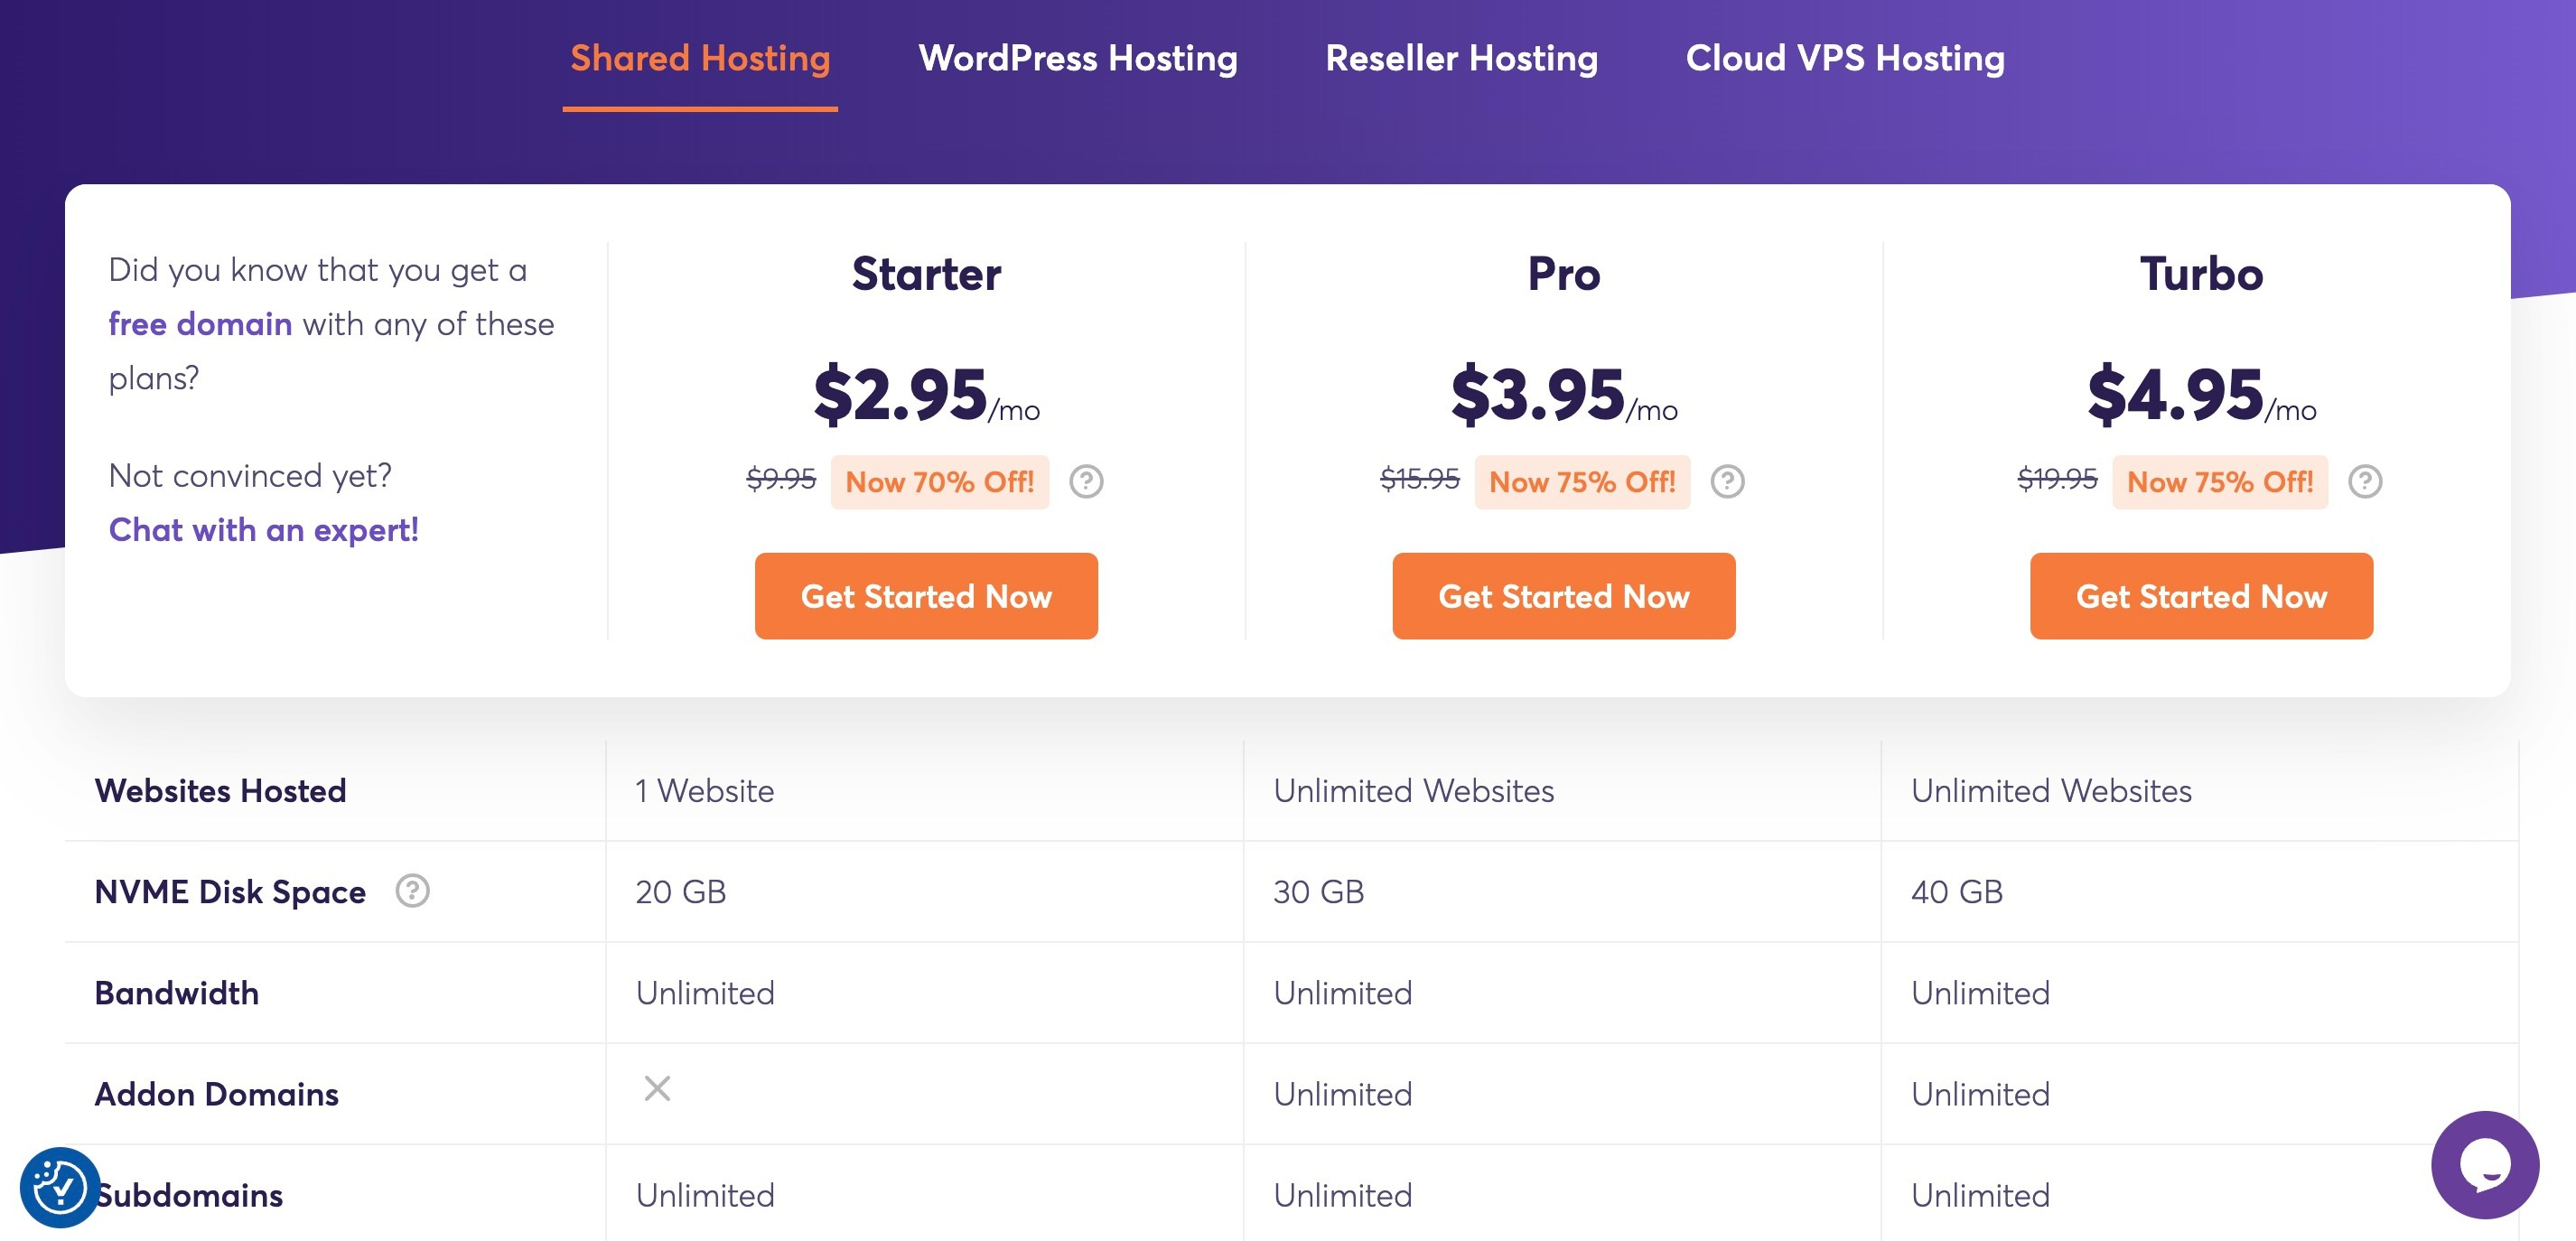 Chemicloud Review: Chemicloud's pricing page